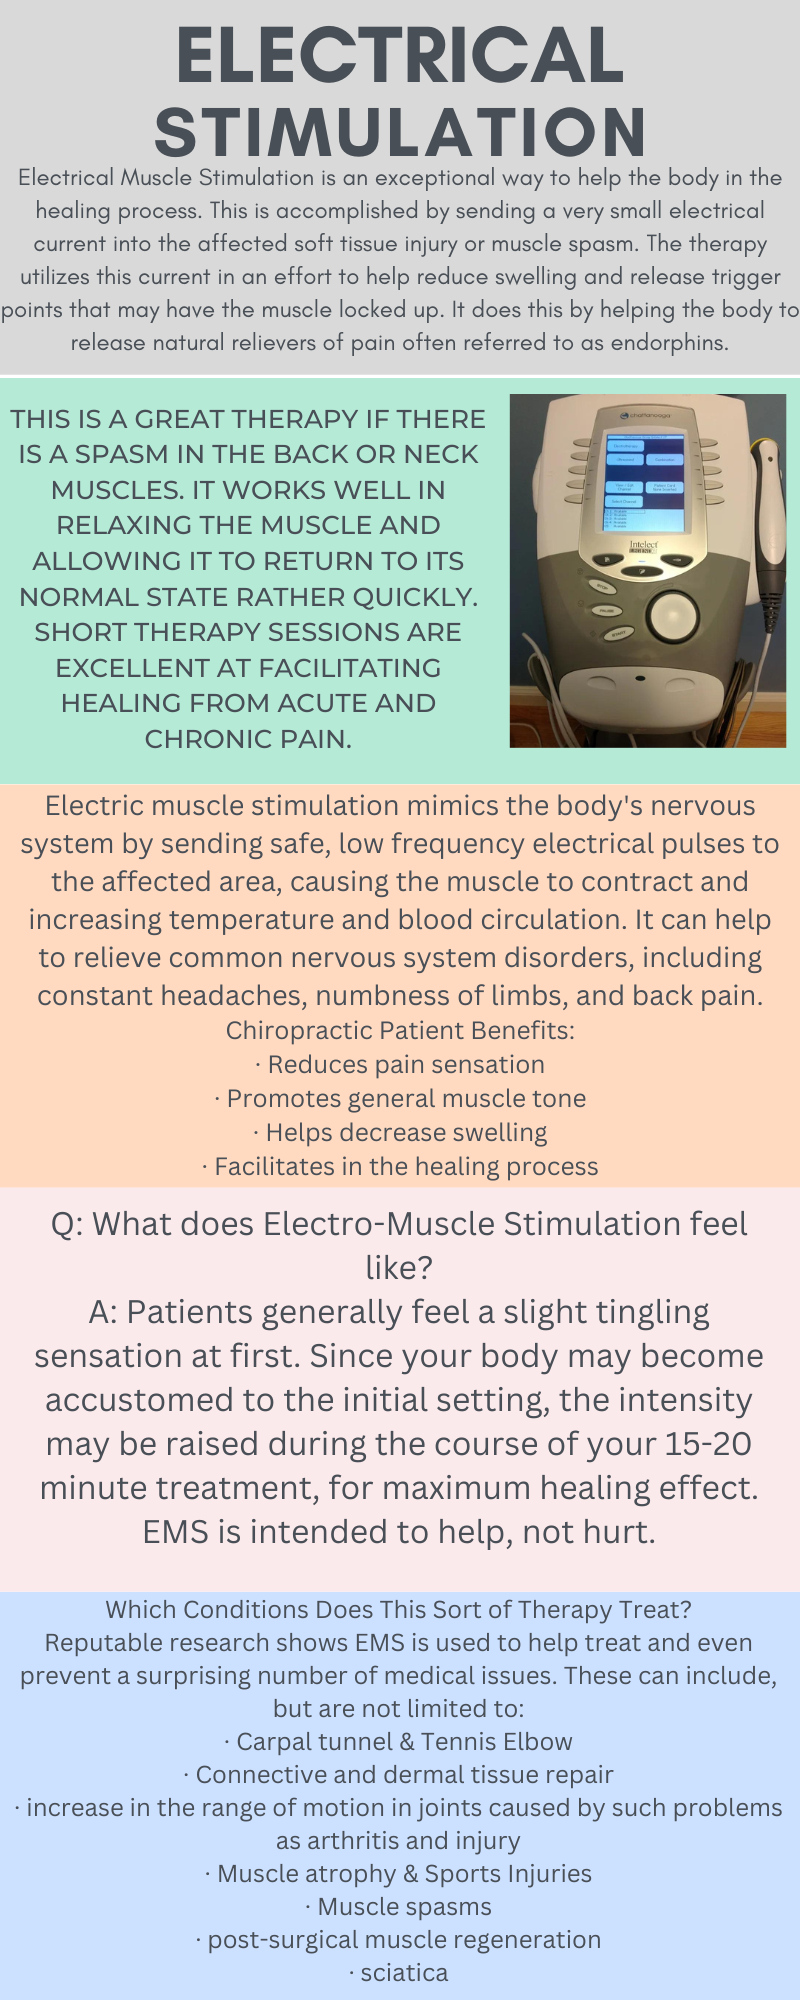 Benefits of Electric Muscle Stimulation